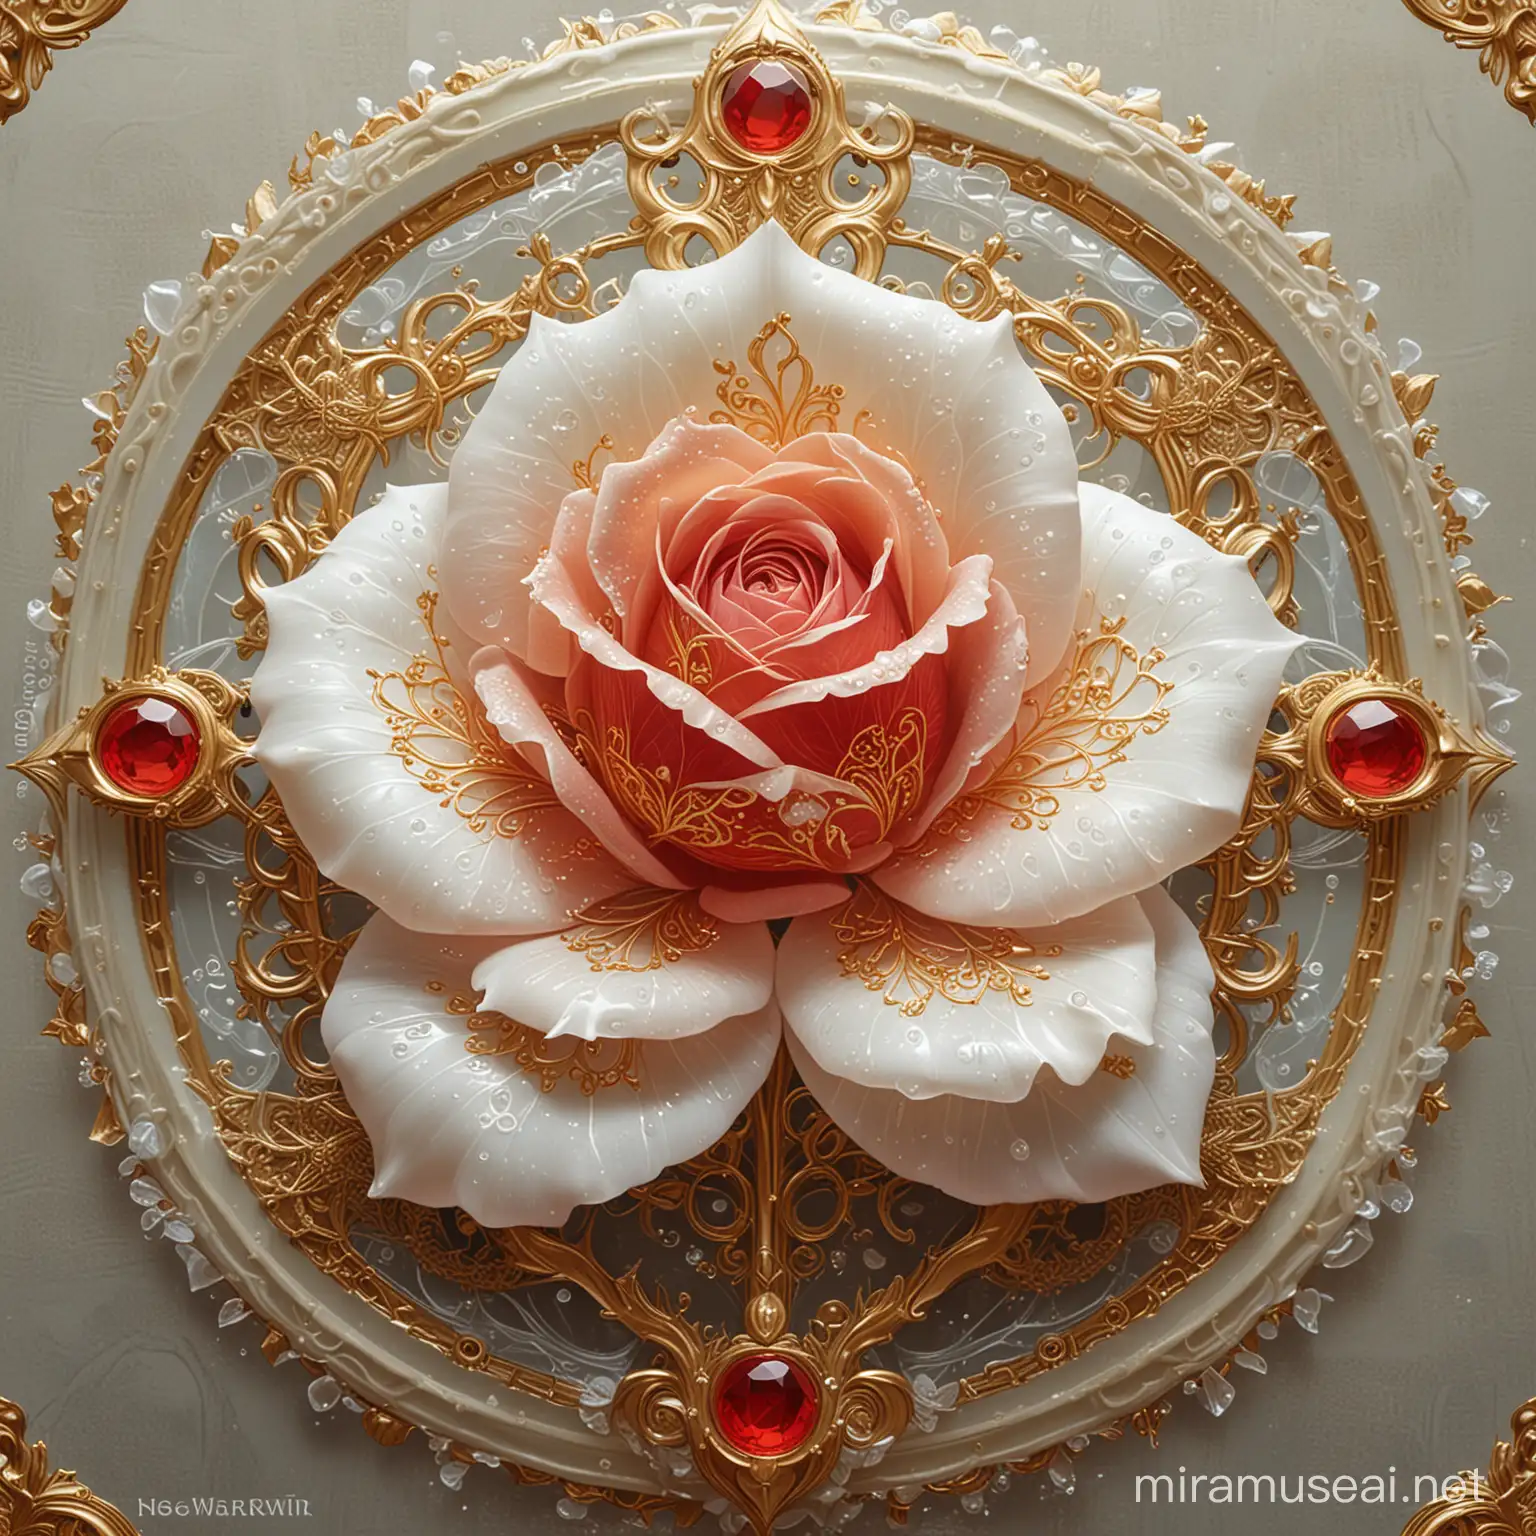 Ethereal Ice Rose Artifact Infographic Dreamy Floral Illustration Inspired by Final Fantasy 10